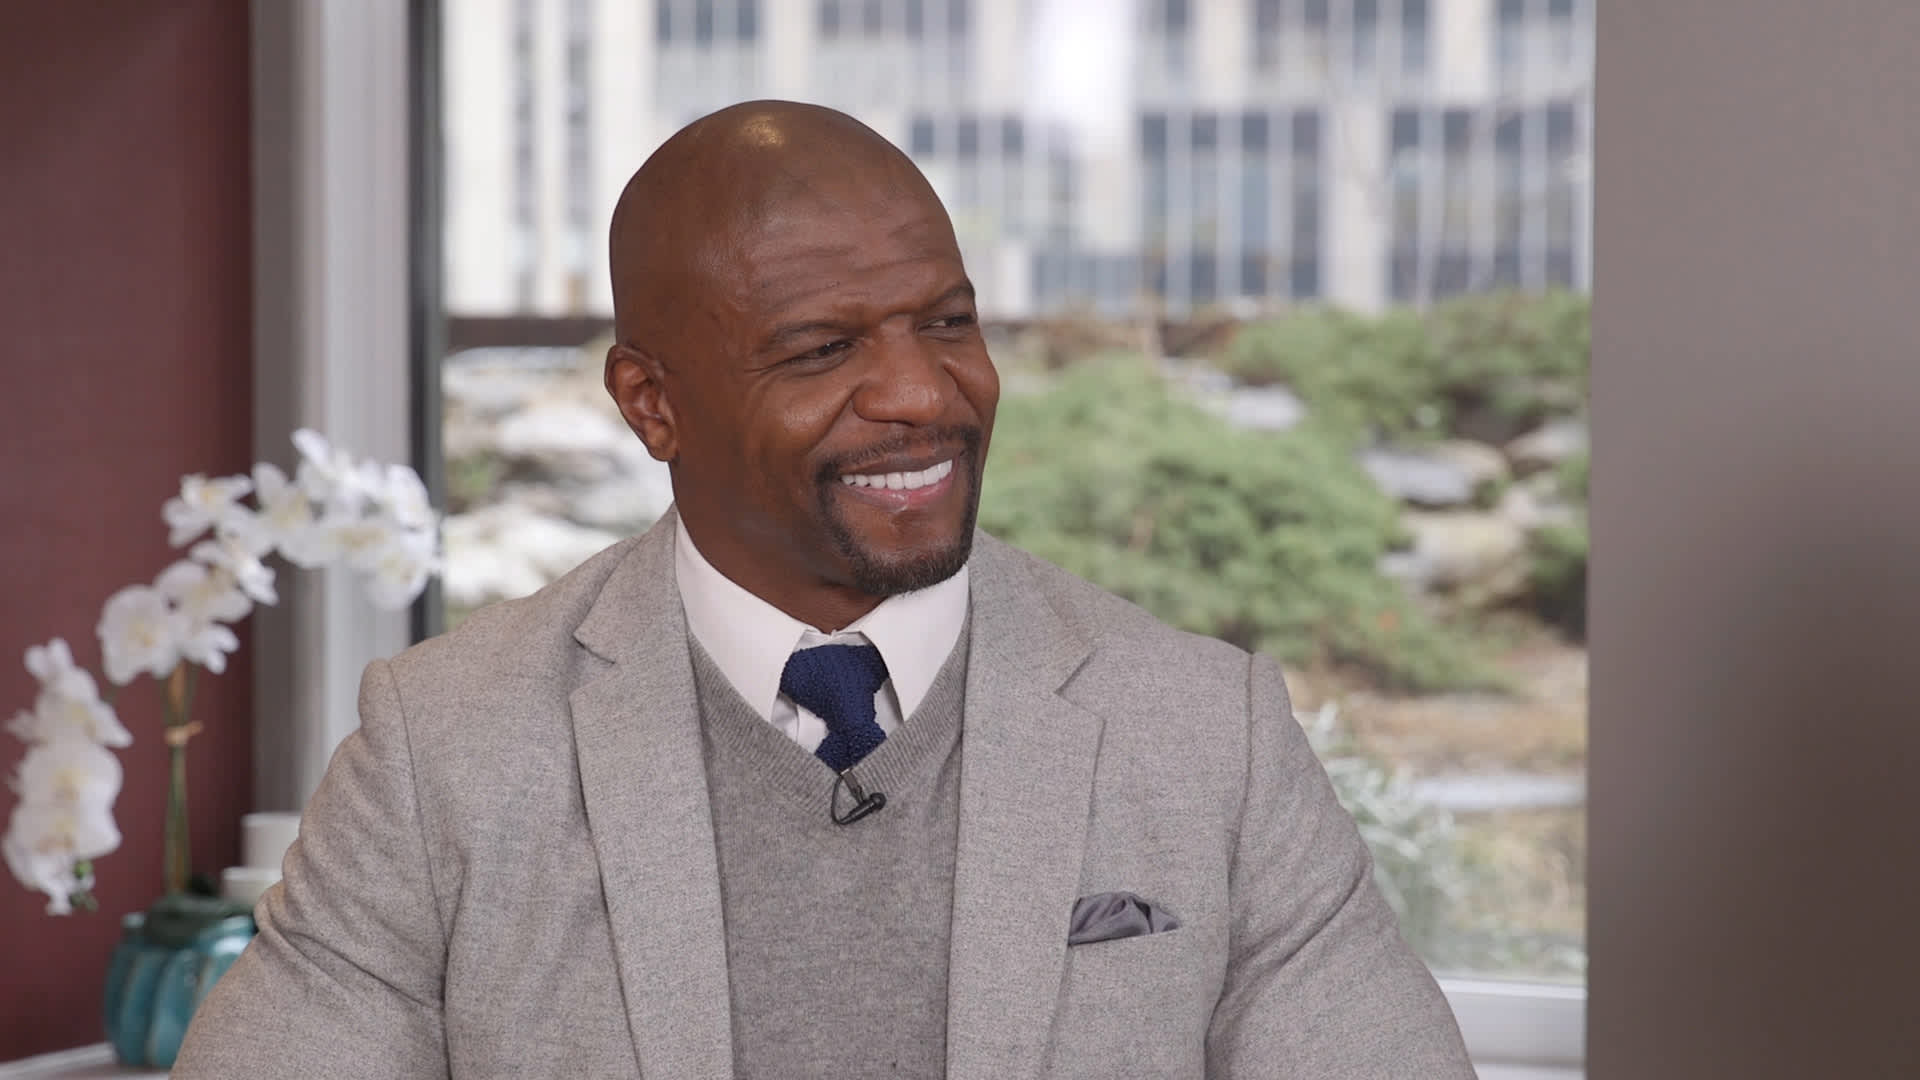 Terry Crews on being broke and his mindset for success